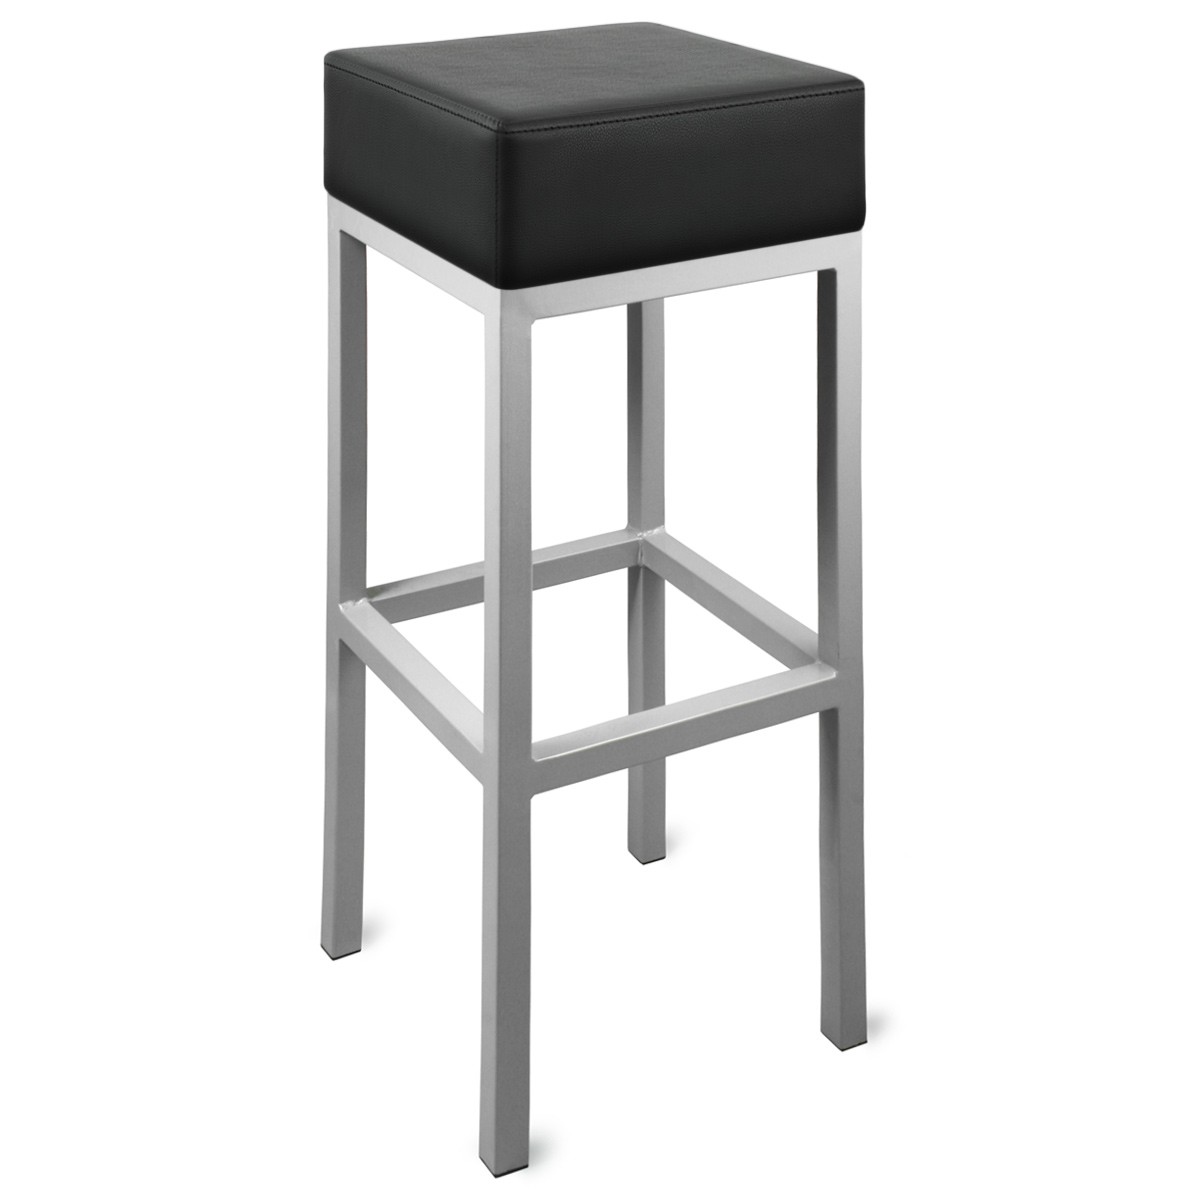 Cara Brushed Square Stool Fixed Height Frame 3 Colours - Black